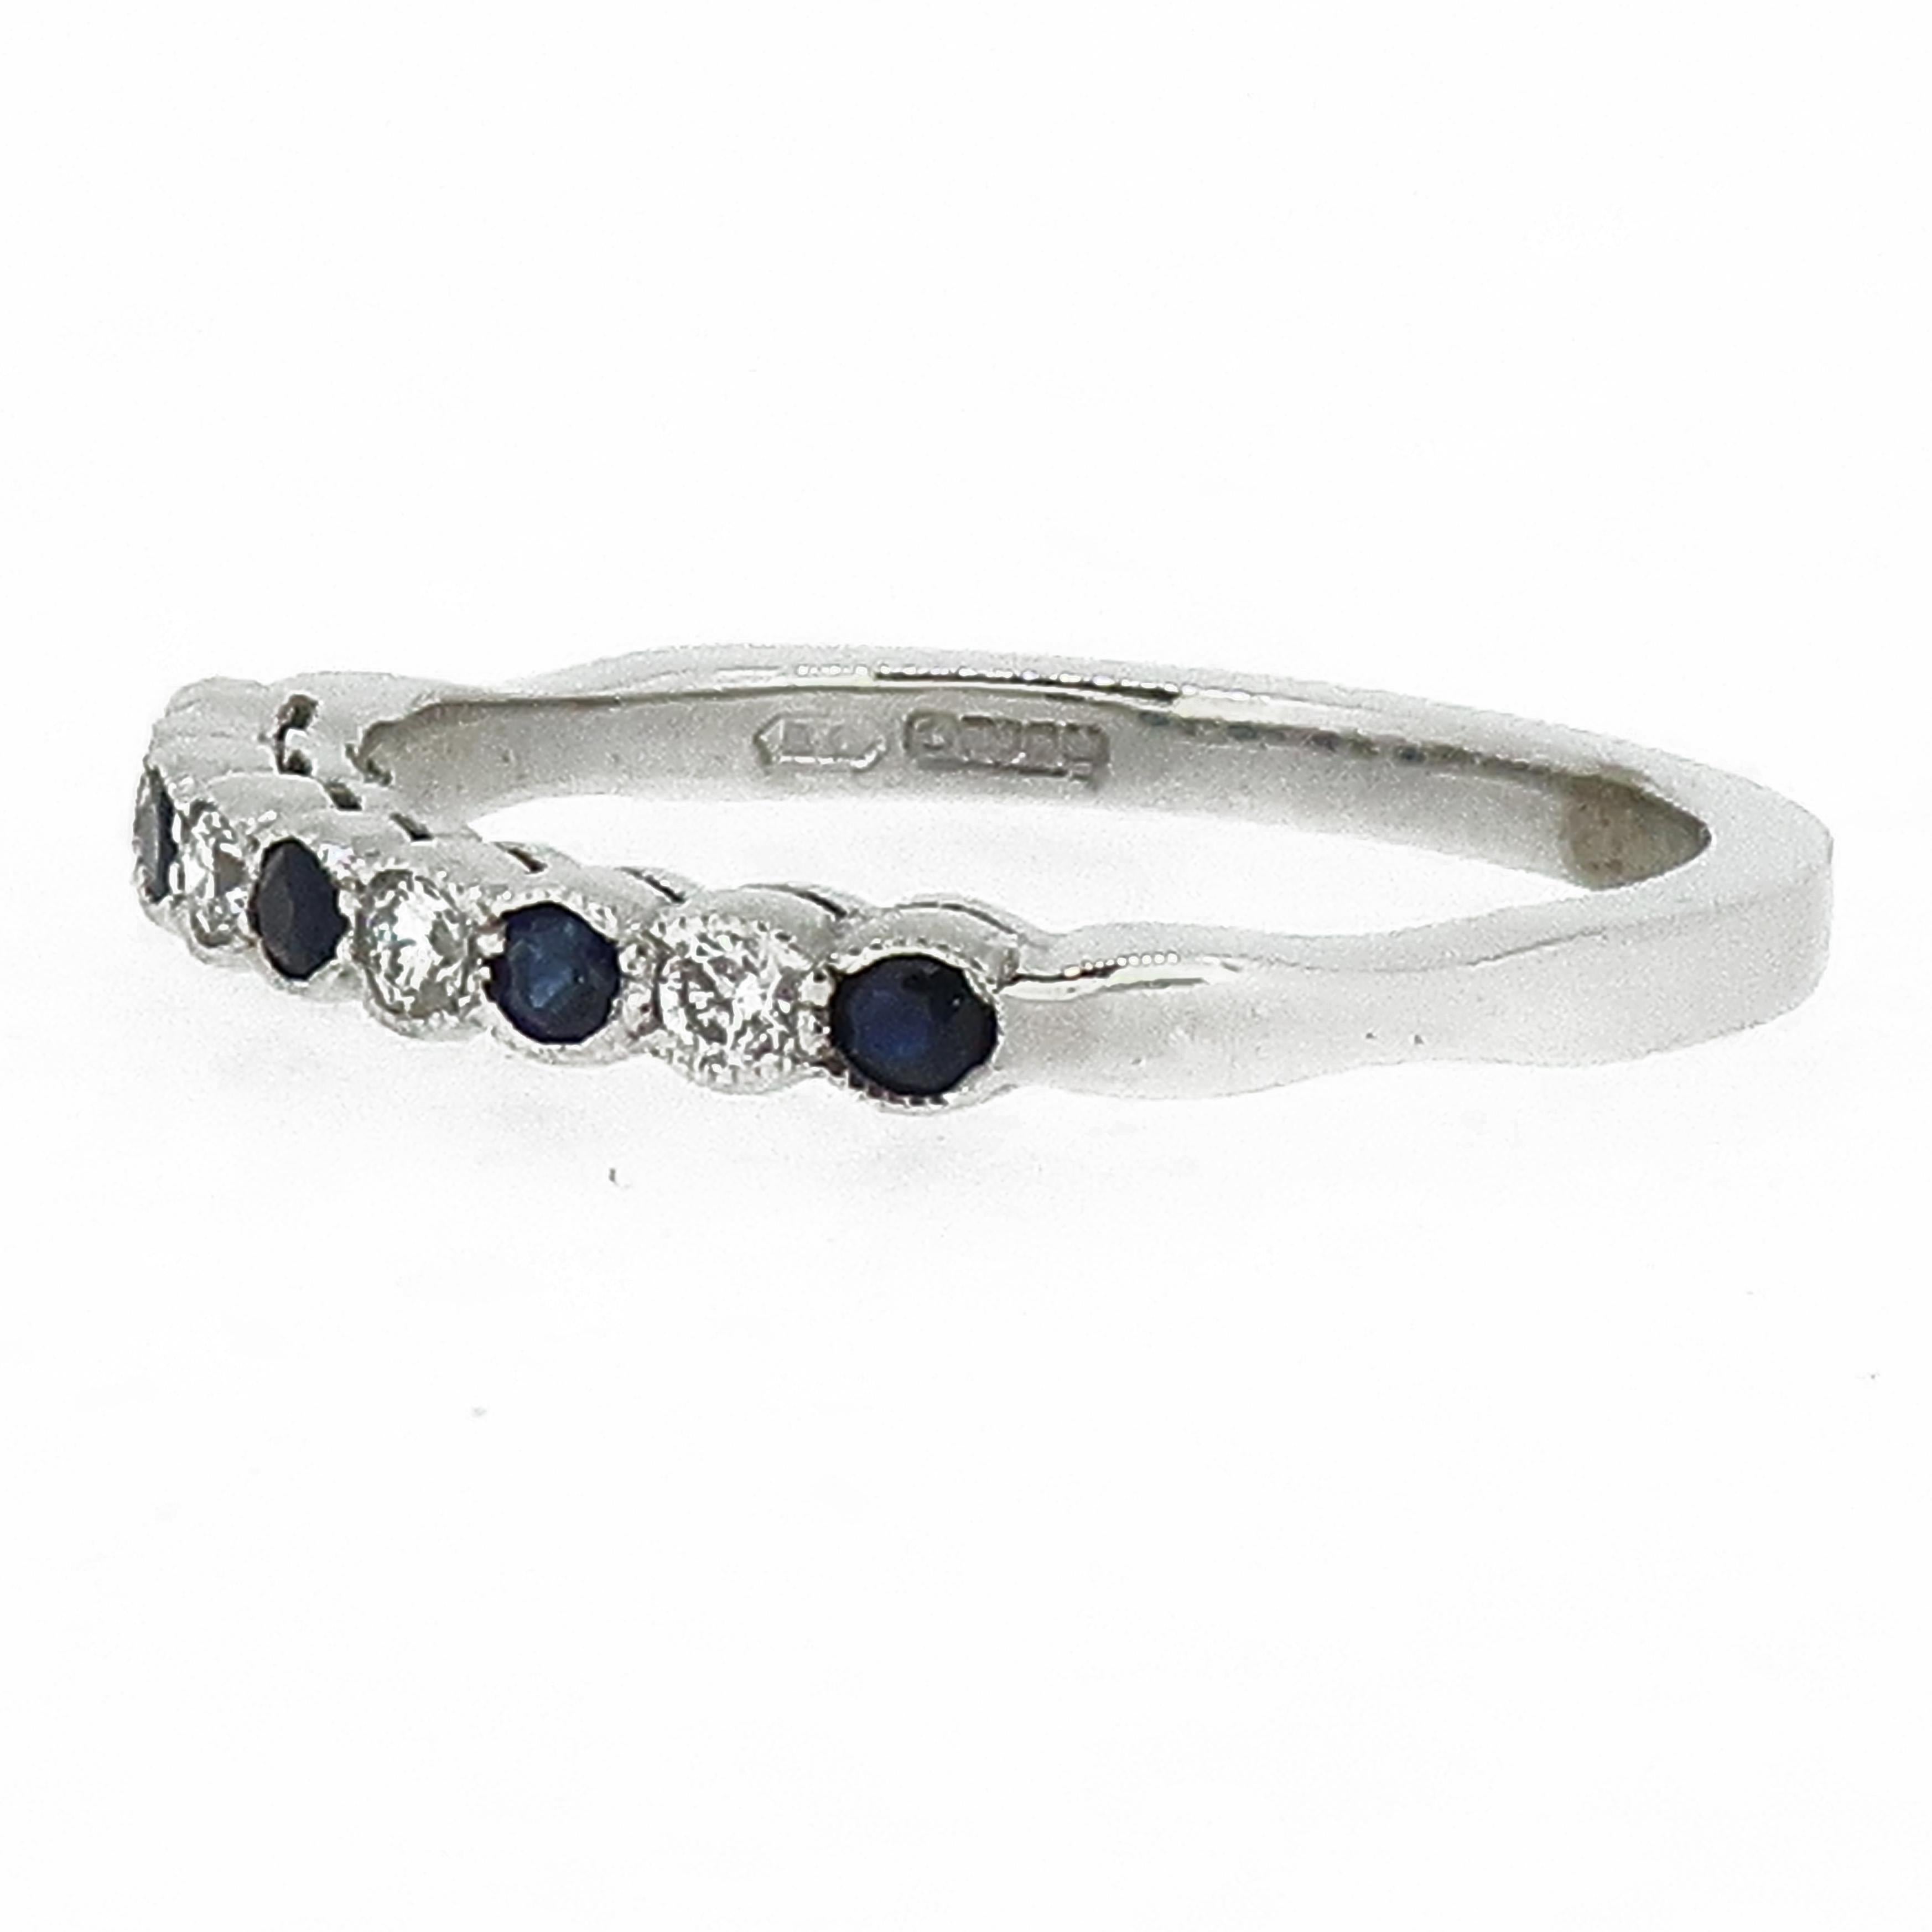 Sapphire & Diamond Eternity Band Ring 18 Karat White Gold

A dainty diamond eternity ring. Consisting of five round blue sapphires and four white brilliant cut diamonds. All set in a delicate mill-grain setting in 18 carat white gold. It would make